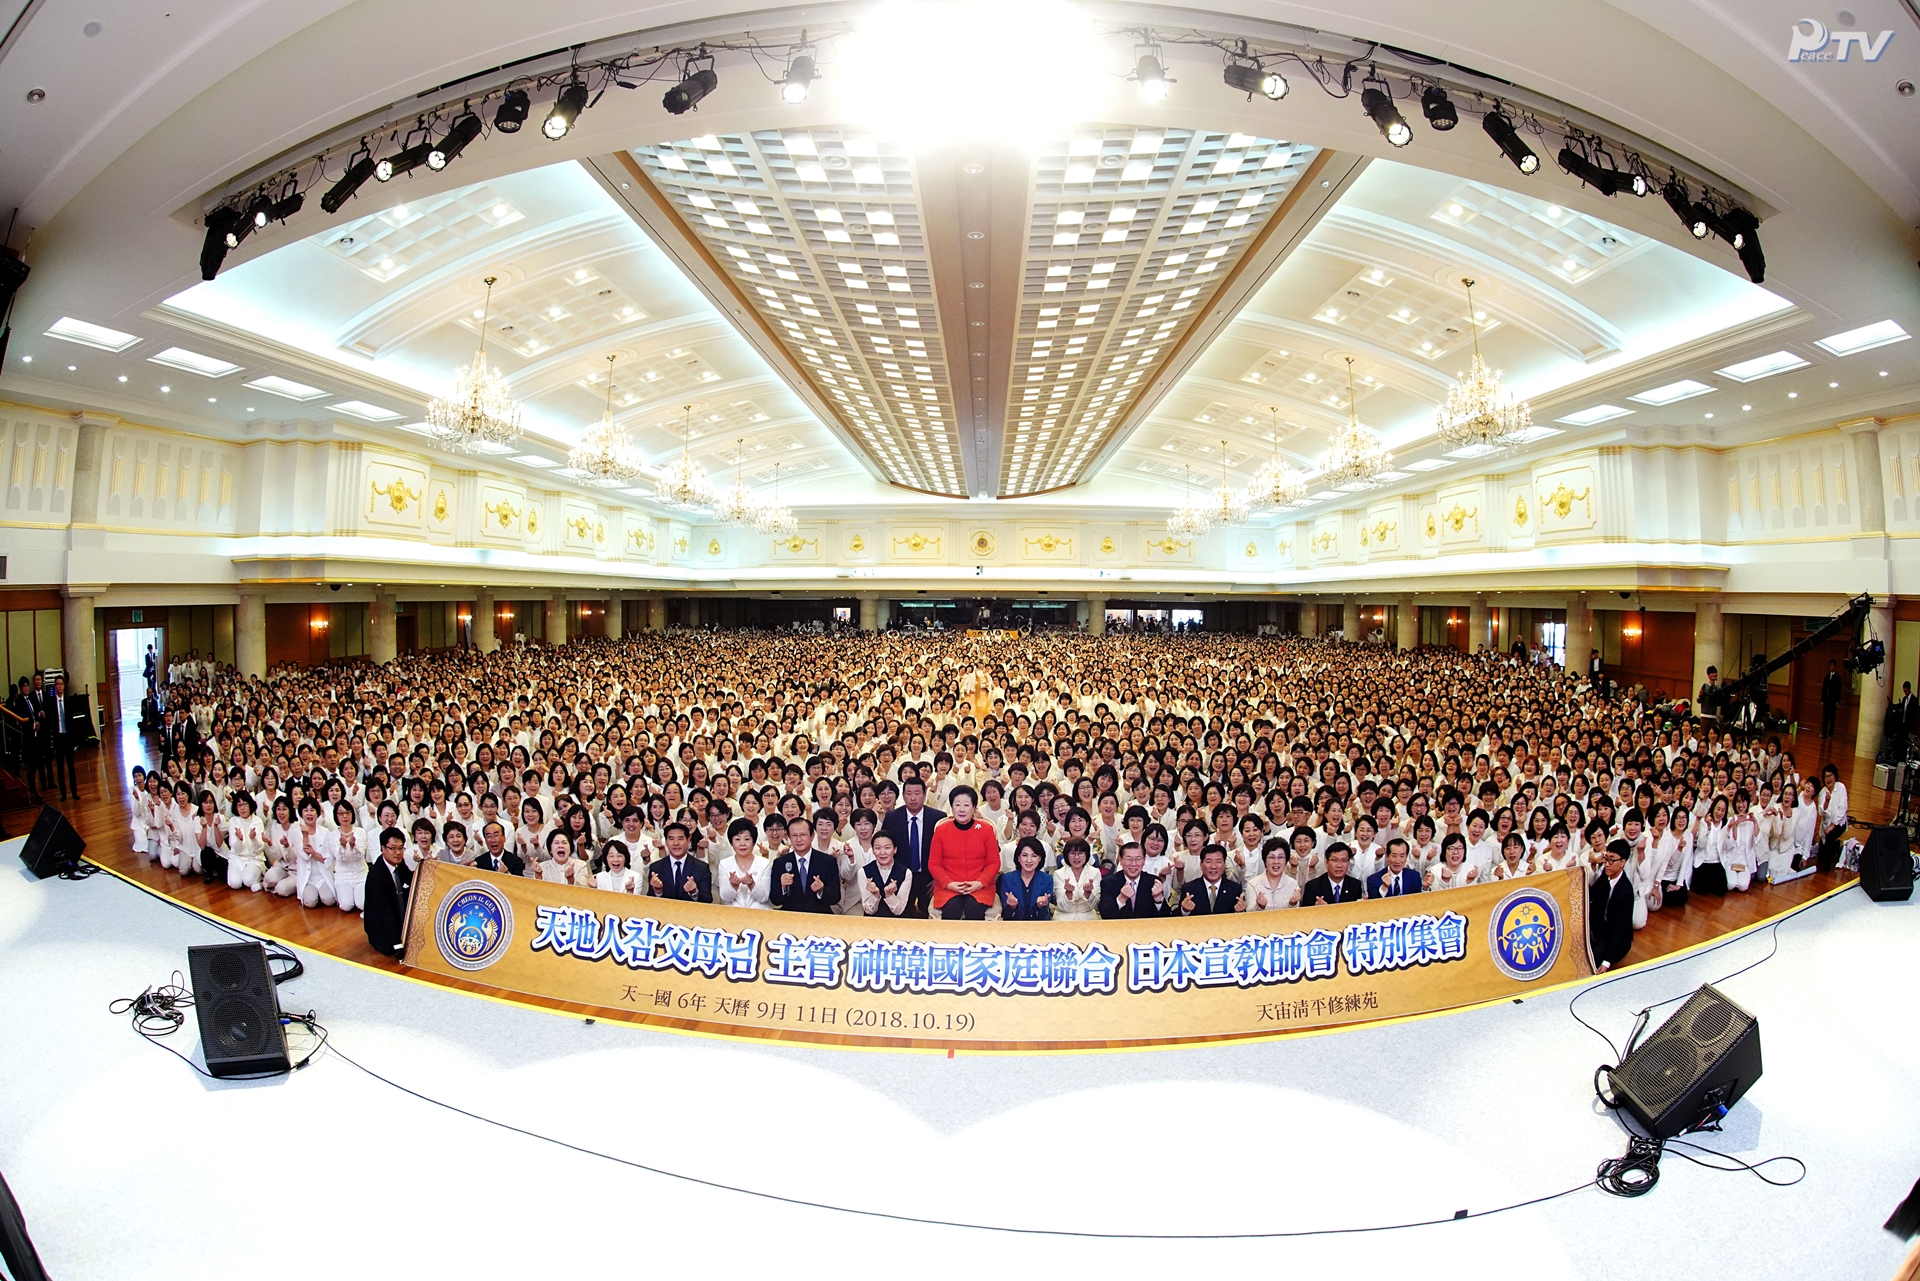 Special Convention for the Japanese Missionary Spouses of FFWPU for a Heavenly Korea (October 19, 2018)